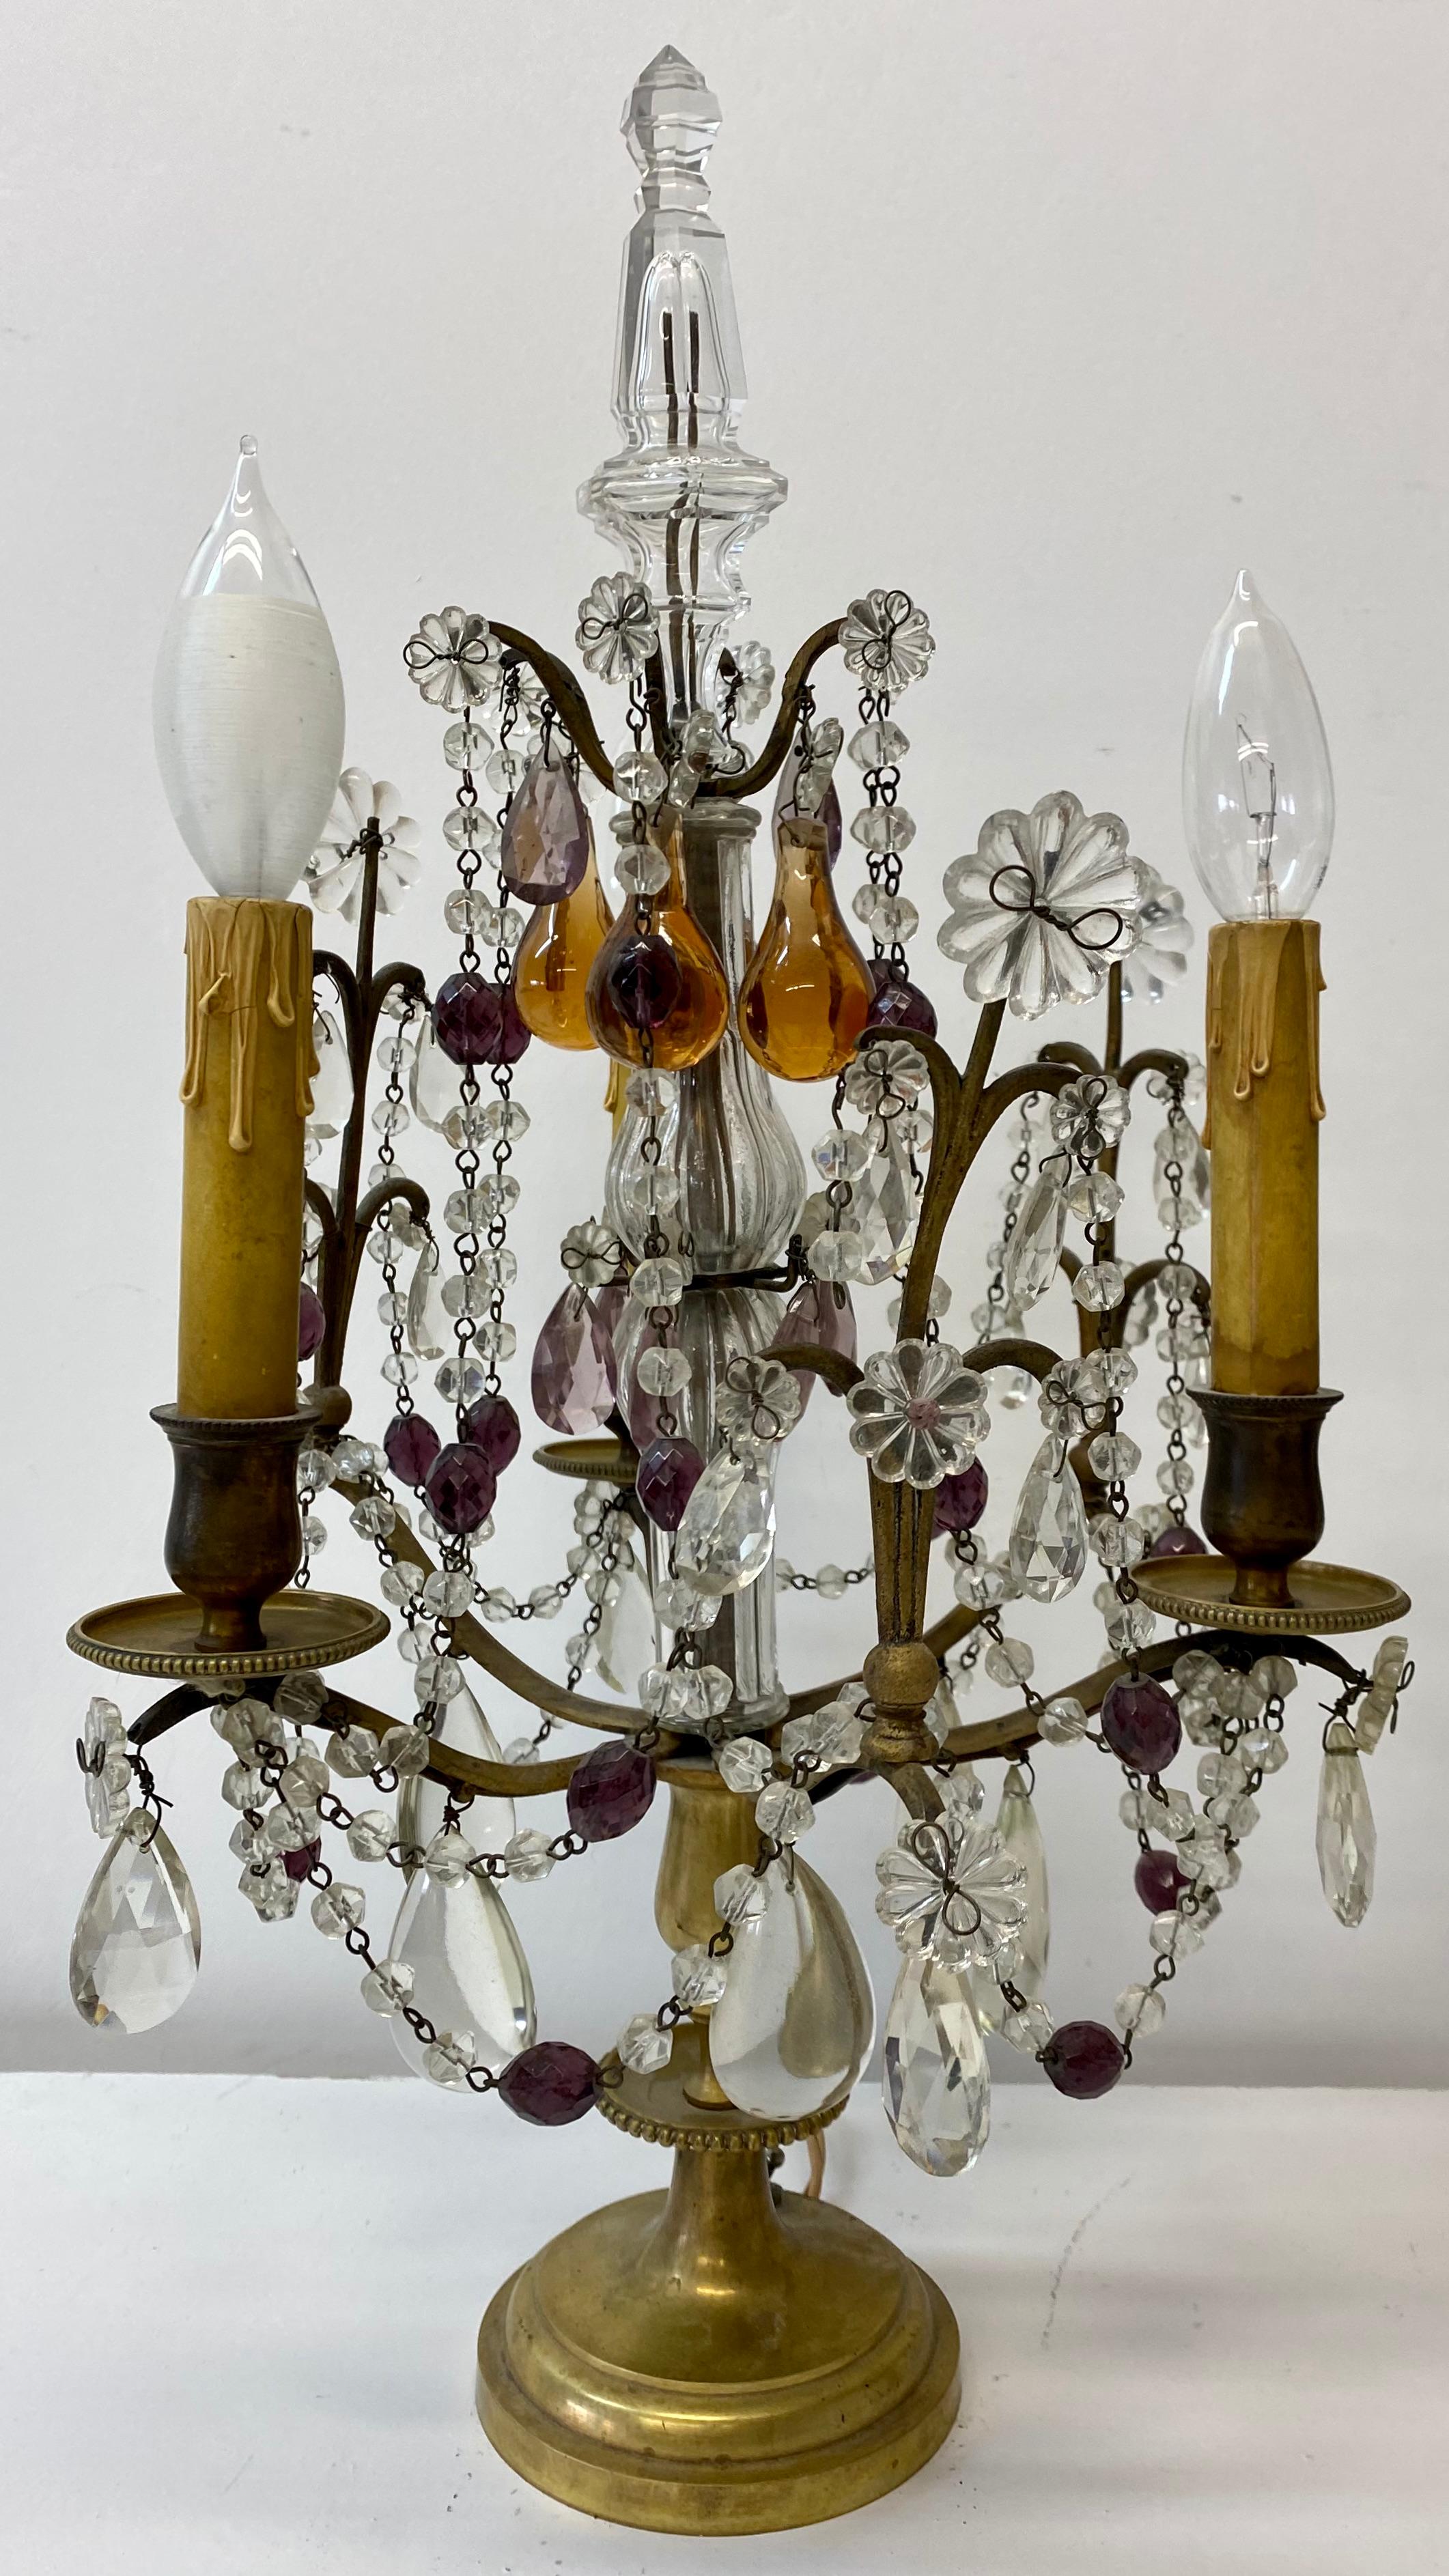 Pair of early 20th century table top four light candelabras, c.1910.

Gorgeous pressed and hand blown glass table top candelabras

The frames are made from cast bronze 

Each candelabra measures 4.5